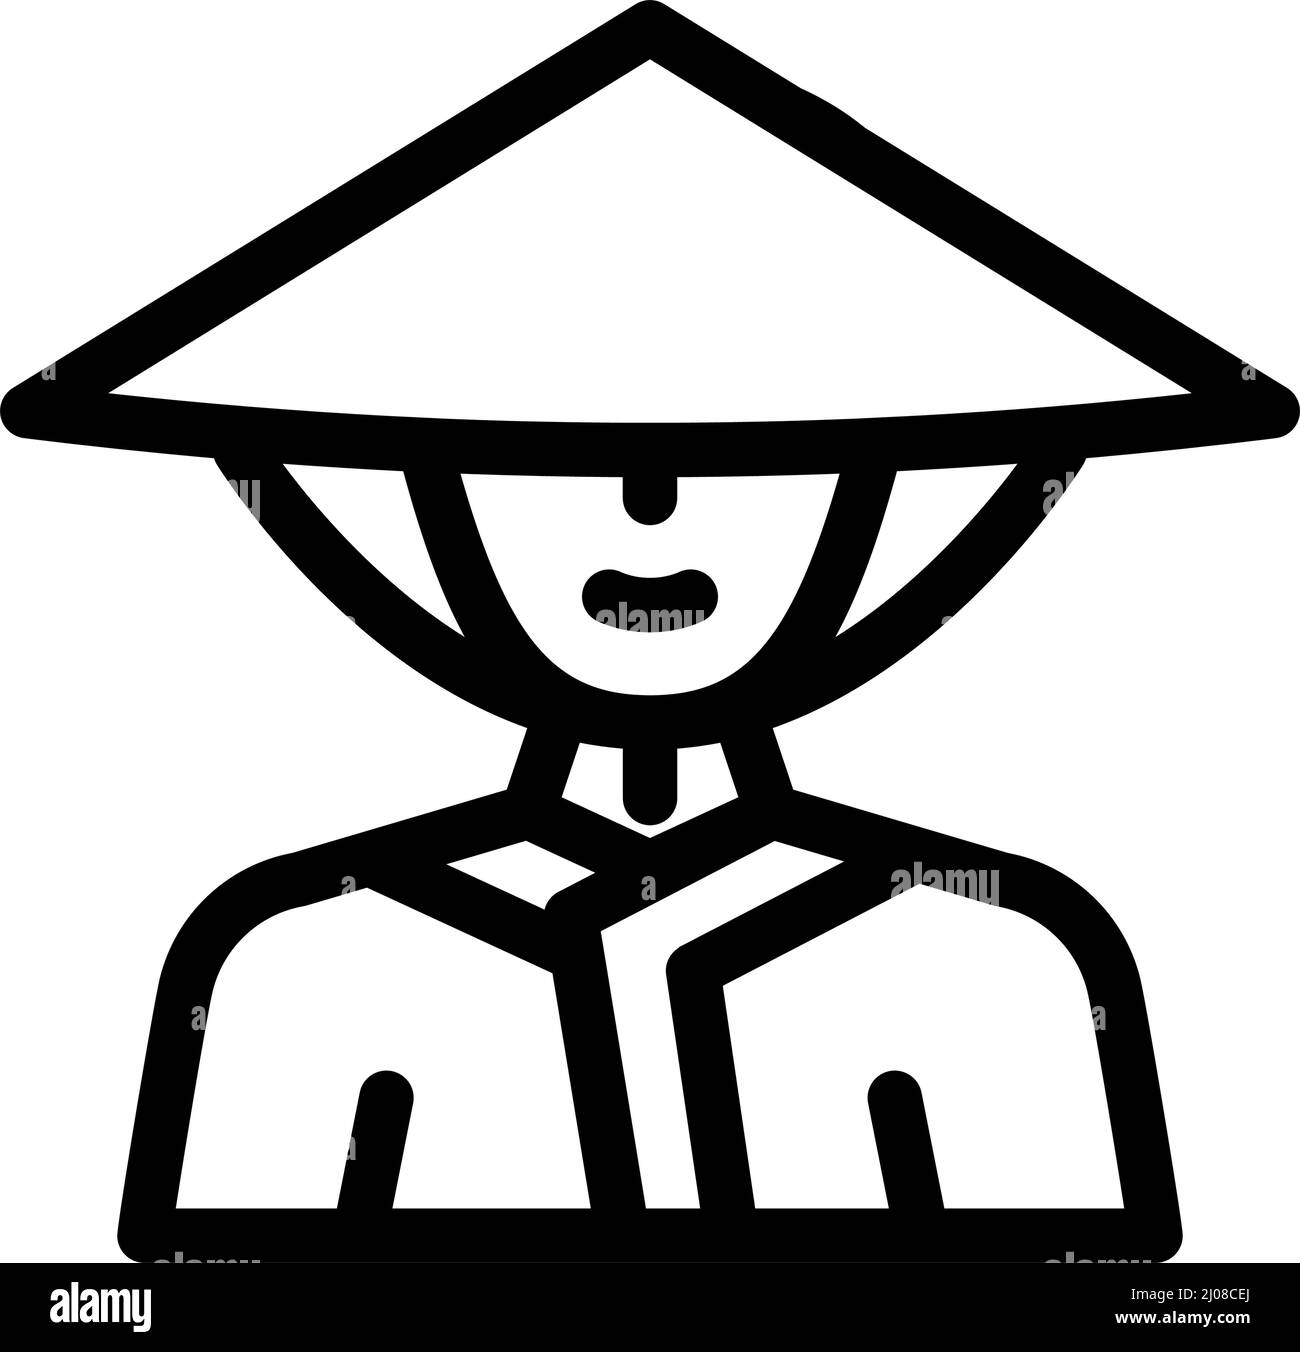 dawley chinese conical hat line icon vector illustration Stock Vector